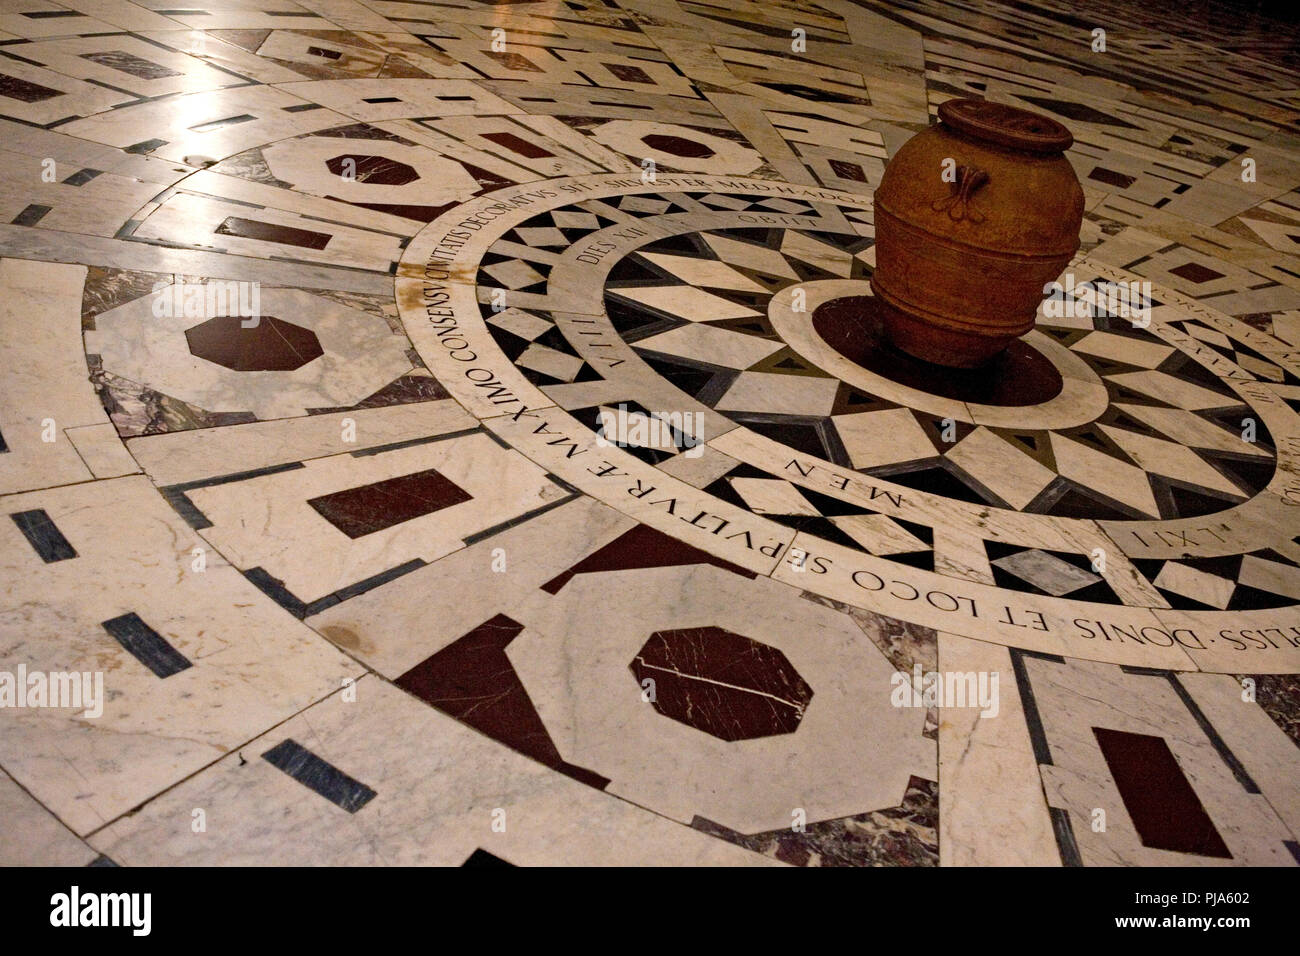 The interior of the Duomo, Florence, Tuscany, Italy, showing an urn and the marble floor of the nave Stock Photo